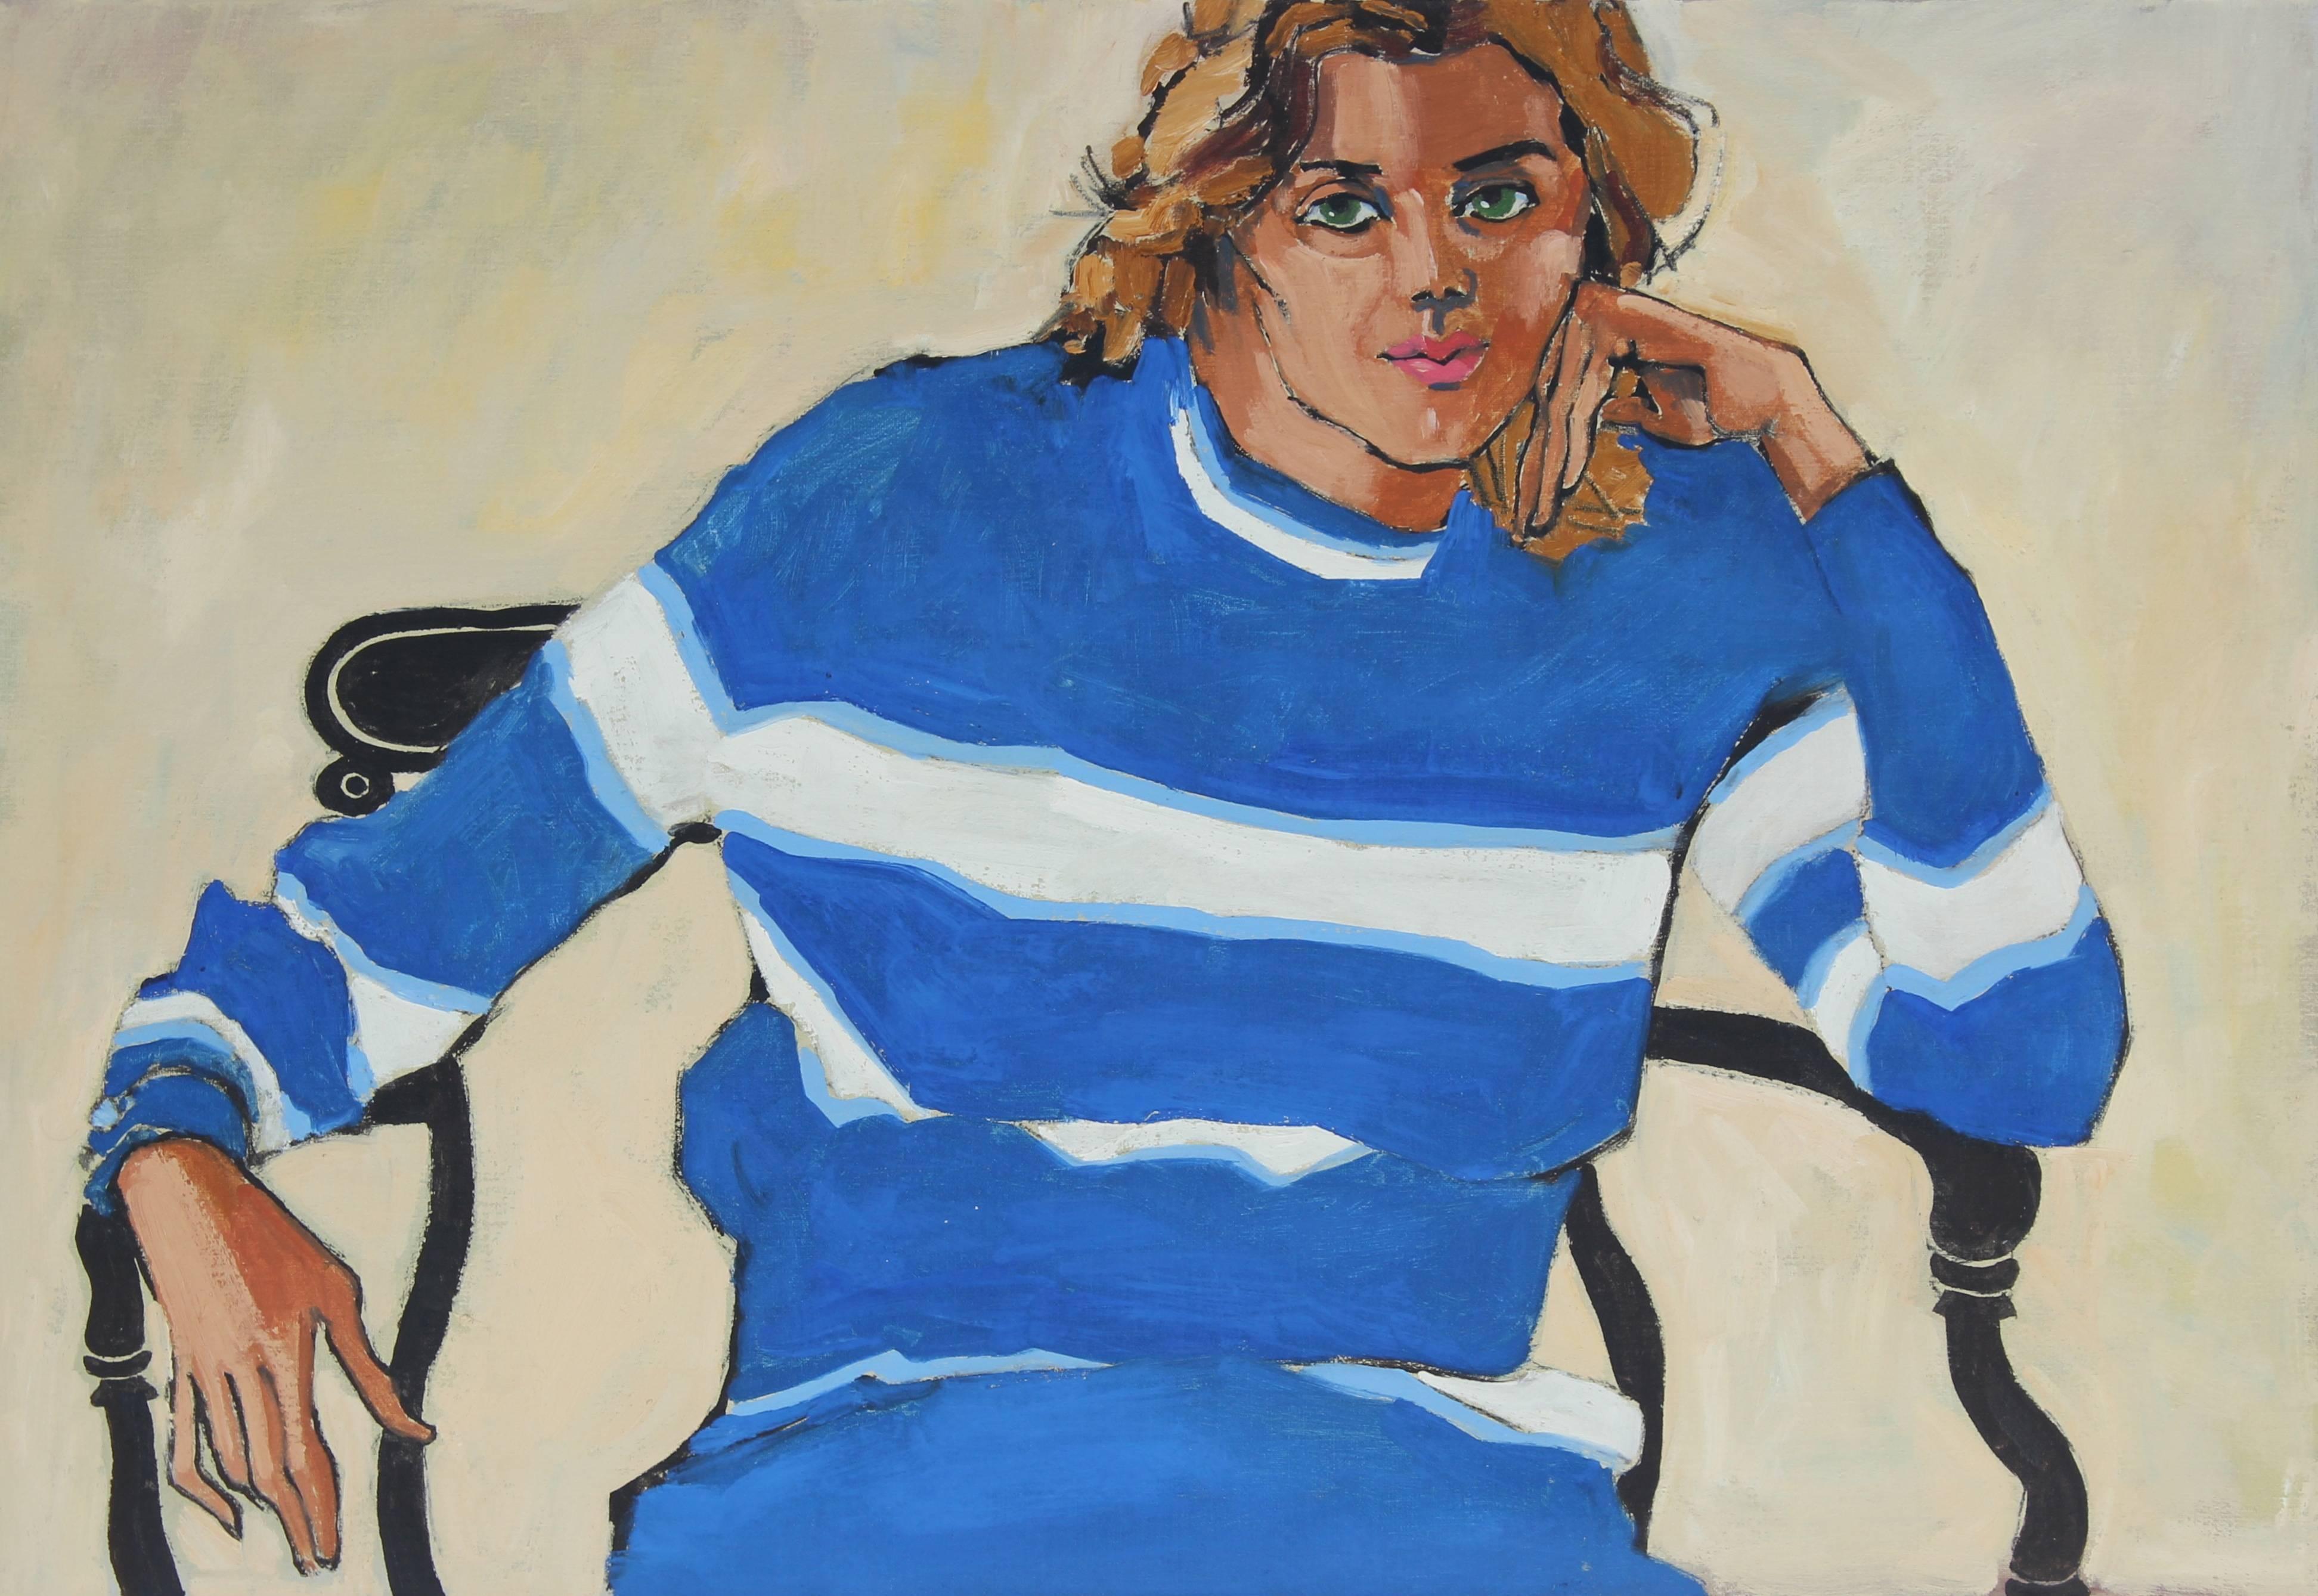 Rip Matteson Portrait Painting - "Oakland, Linda" Oil Painting Portrait in Striped Royal Blue, 1972